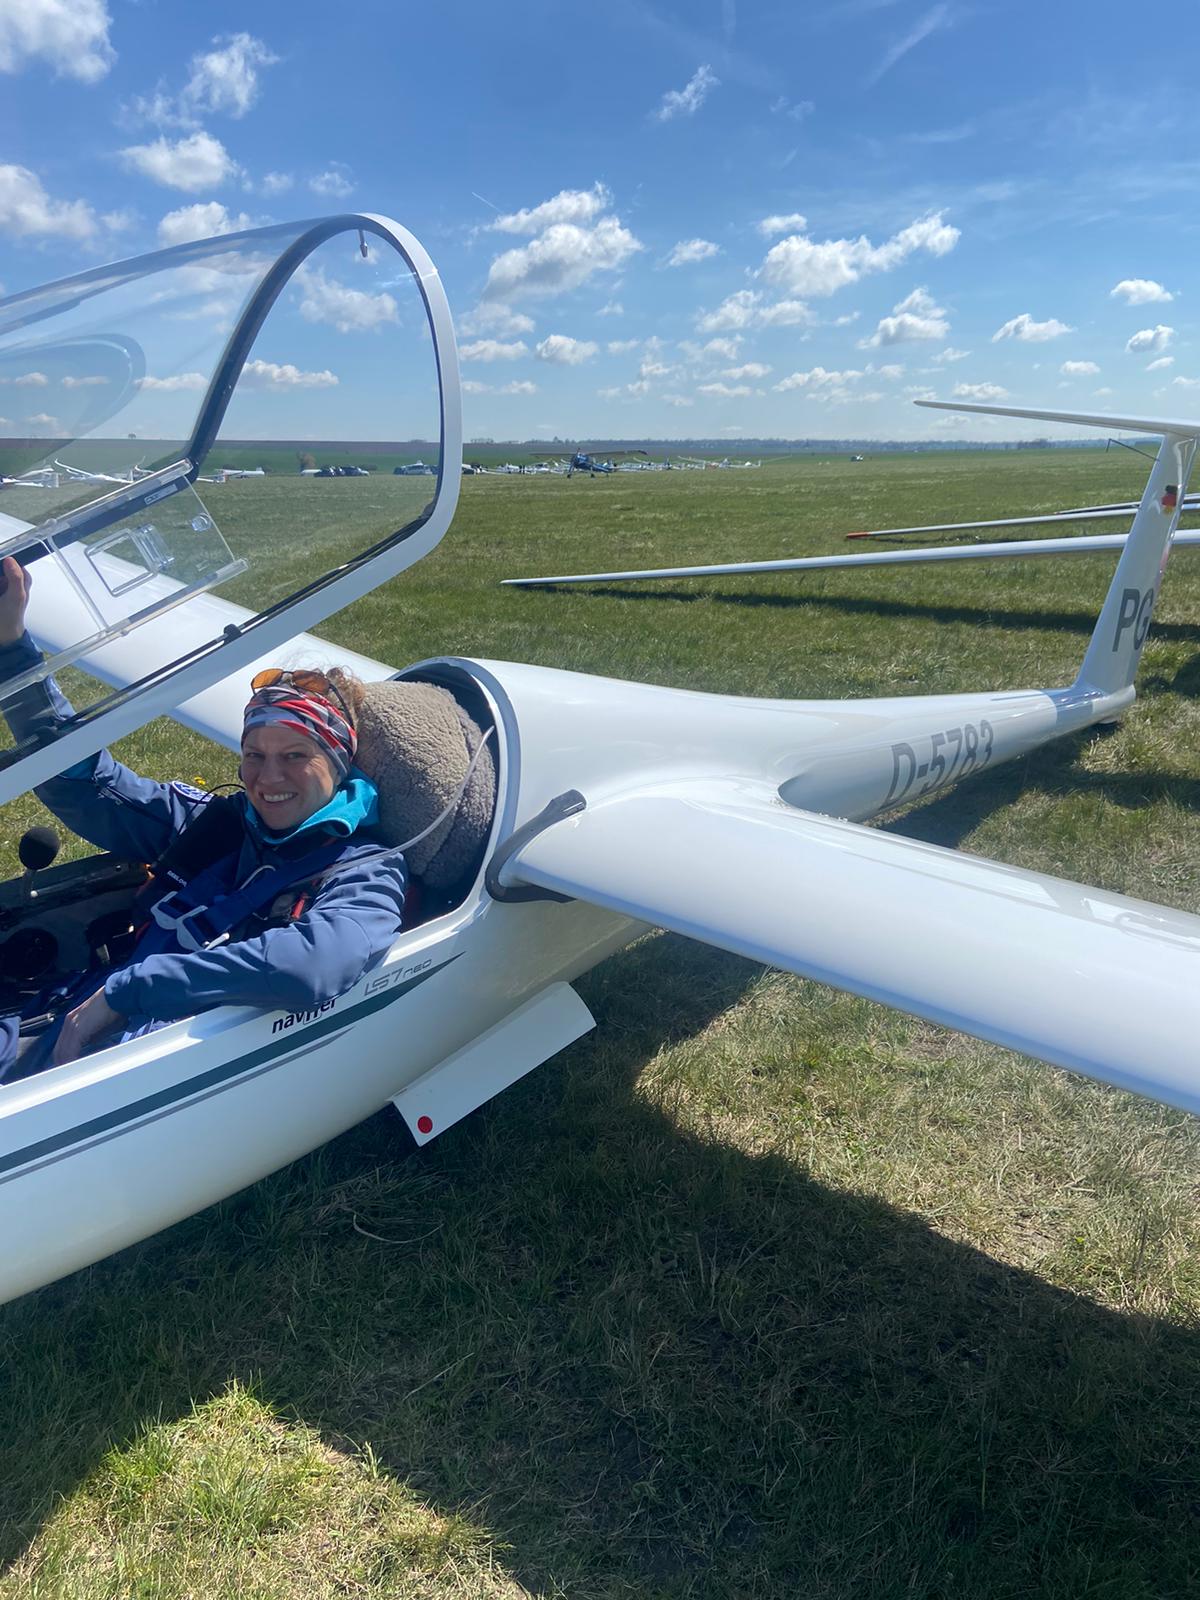 Since her early youth Carolin has been a passionate glider pilot.